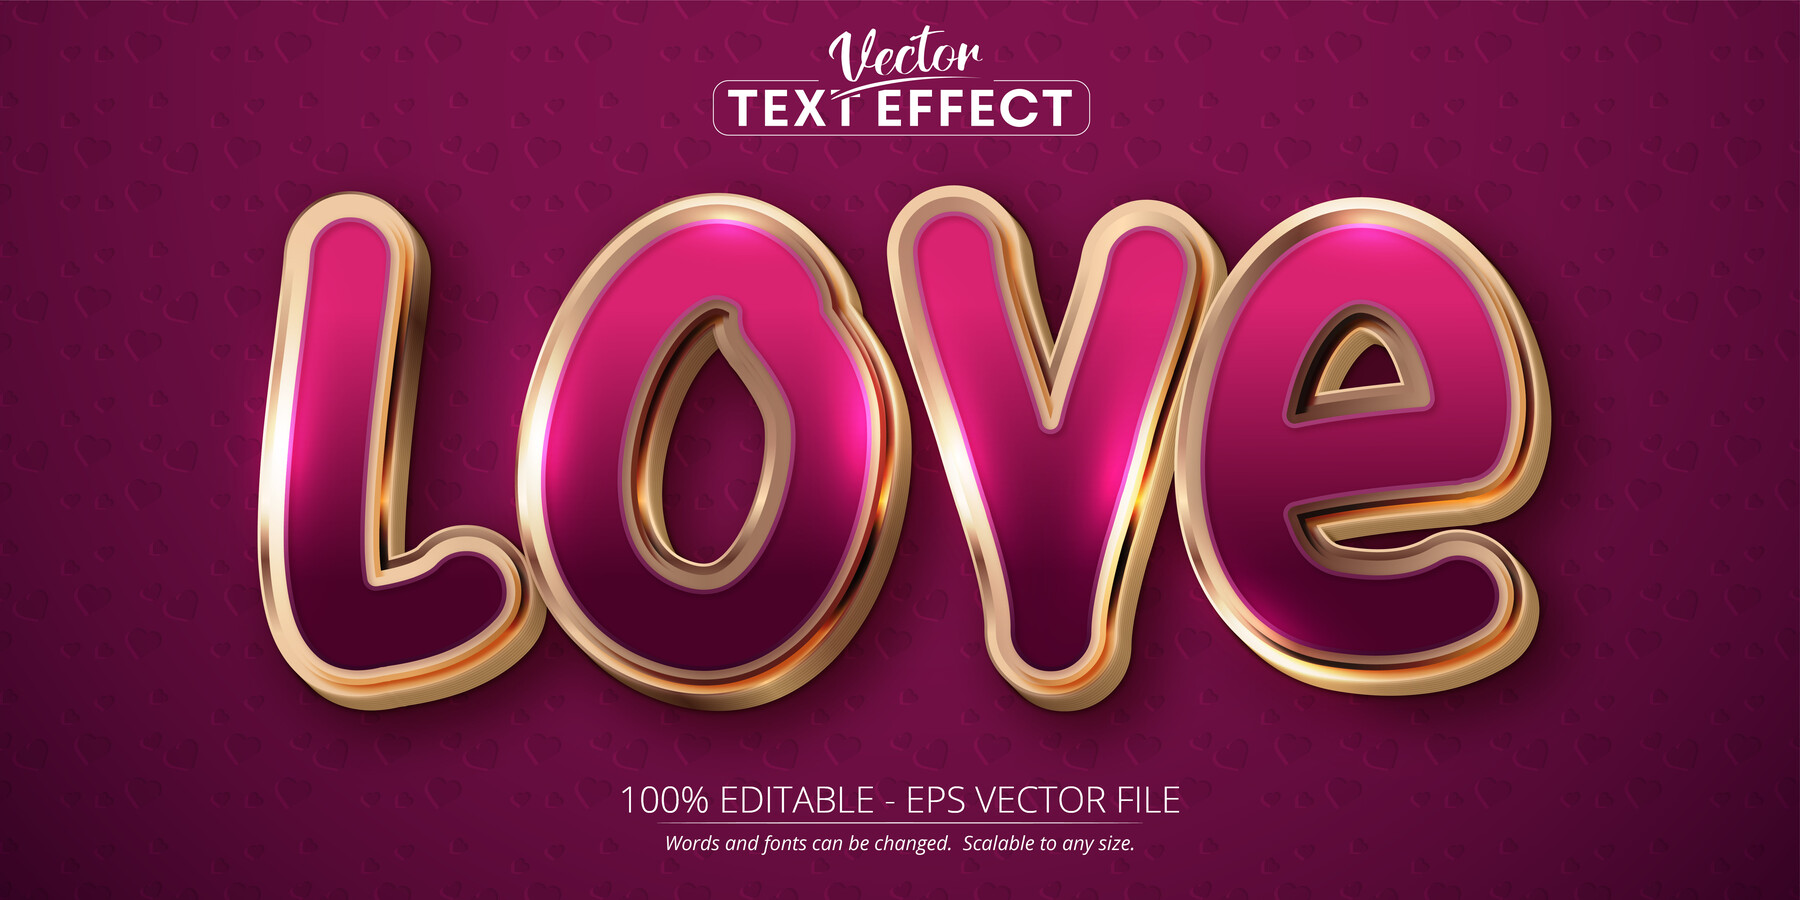 ArtStation - Love text, shiny rose gold color style editable text effect on pink  background | Artworks